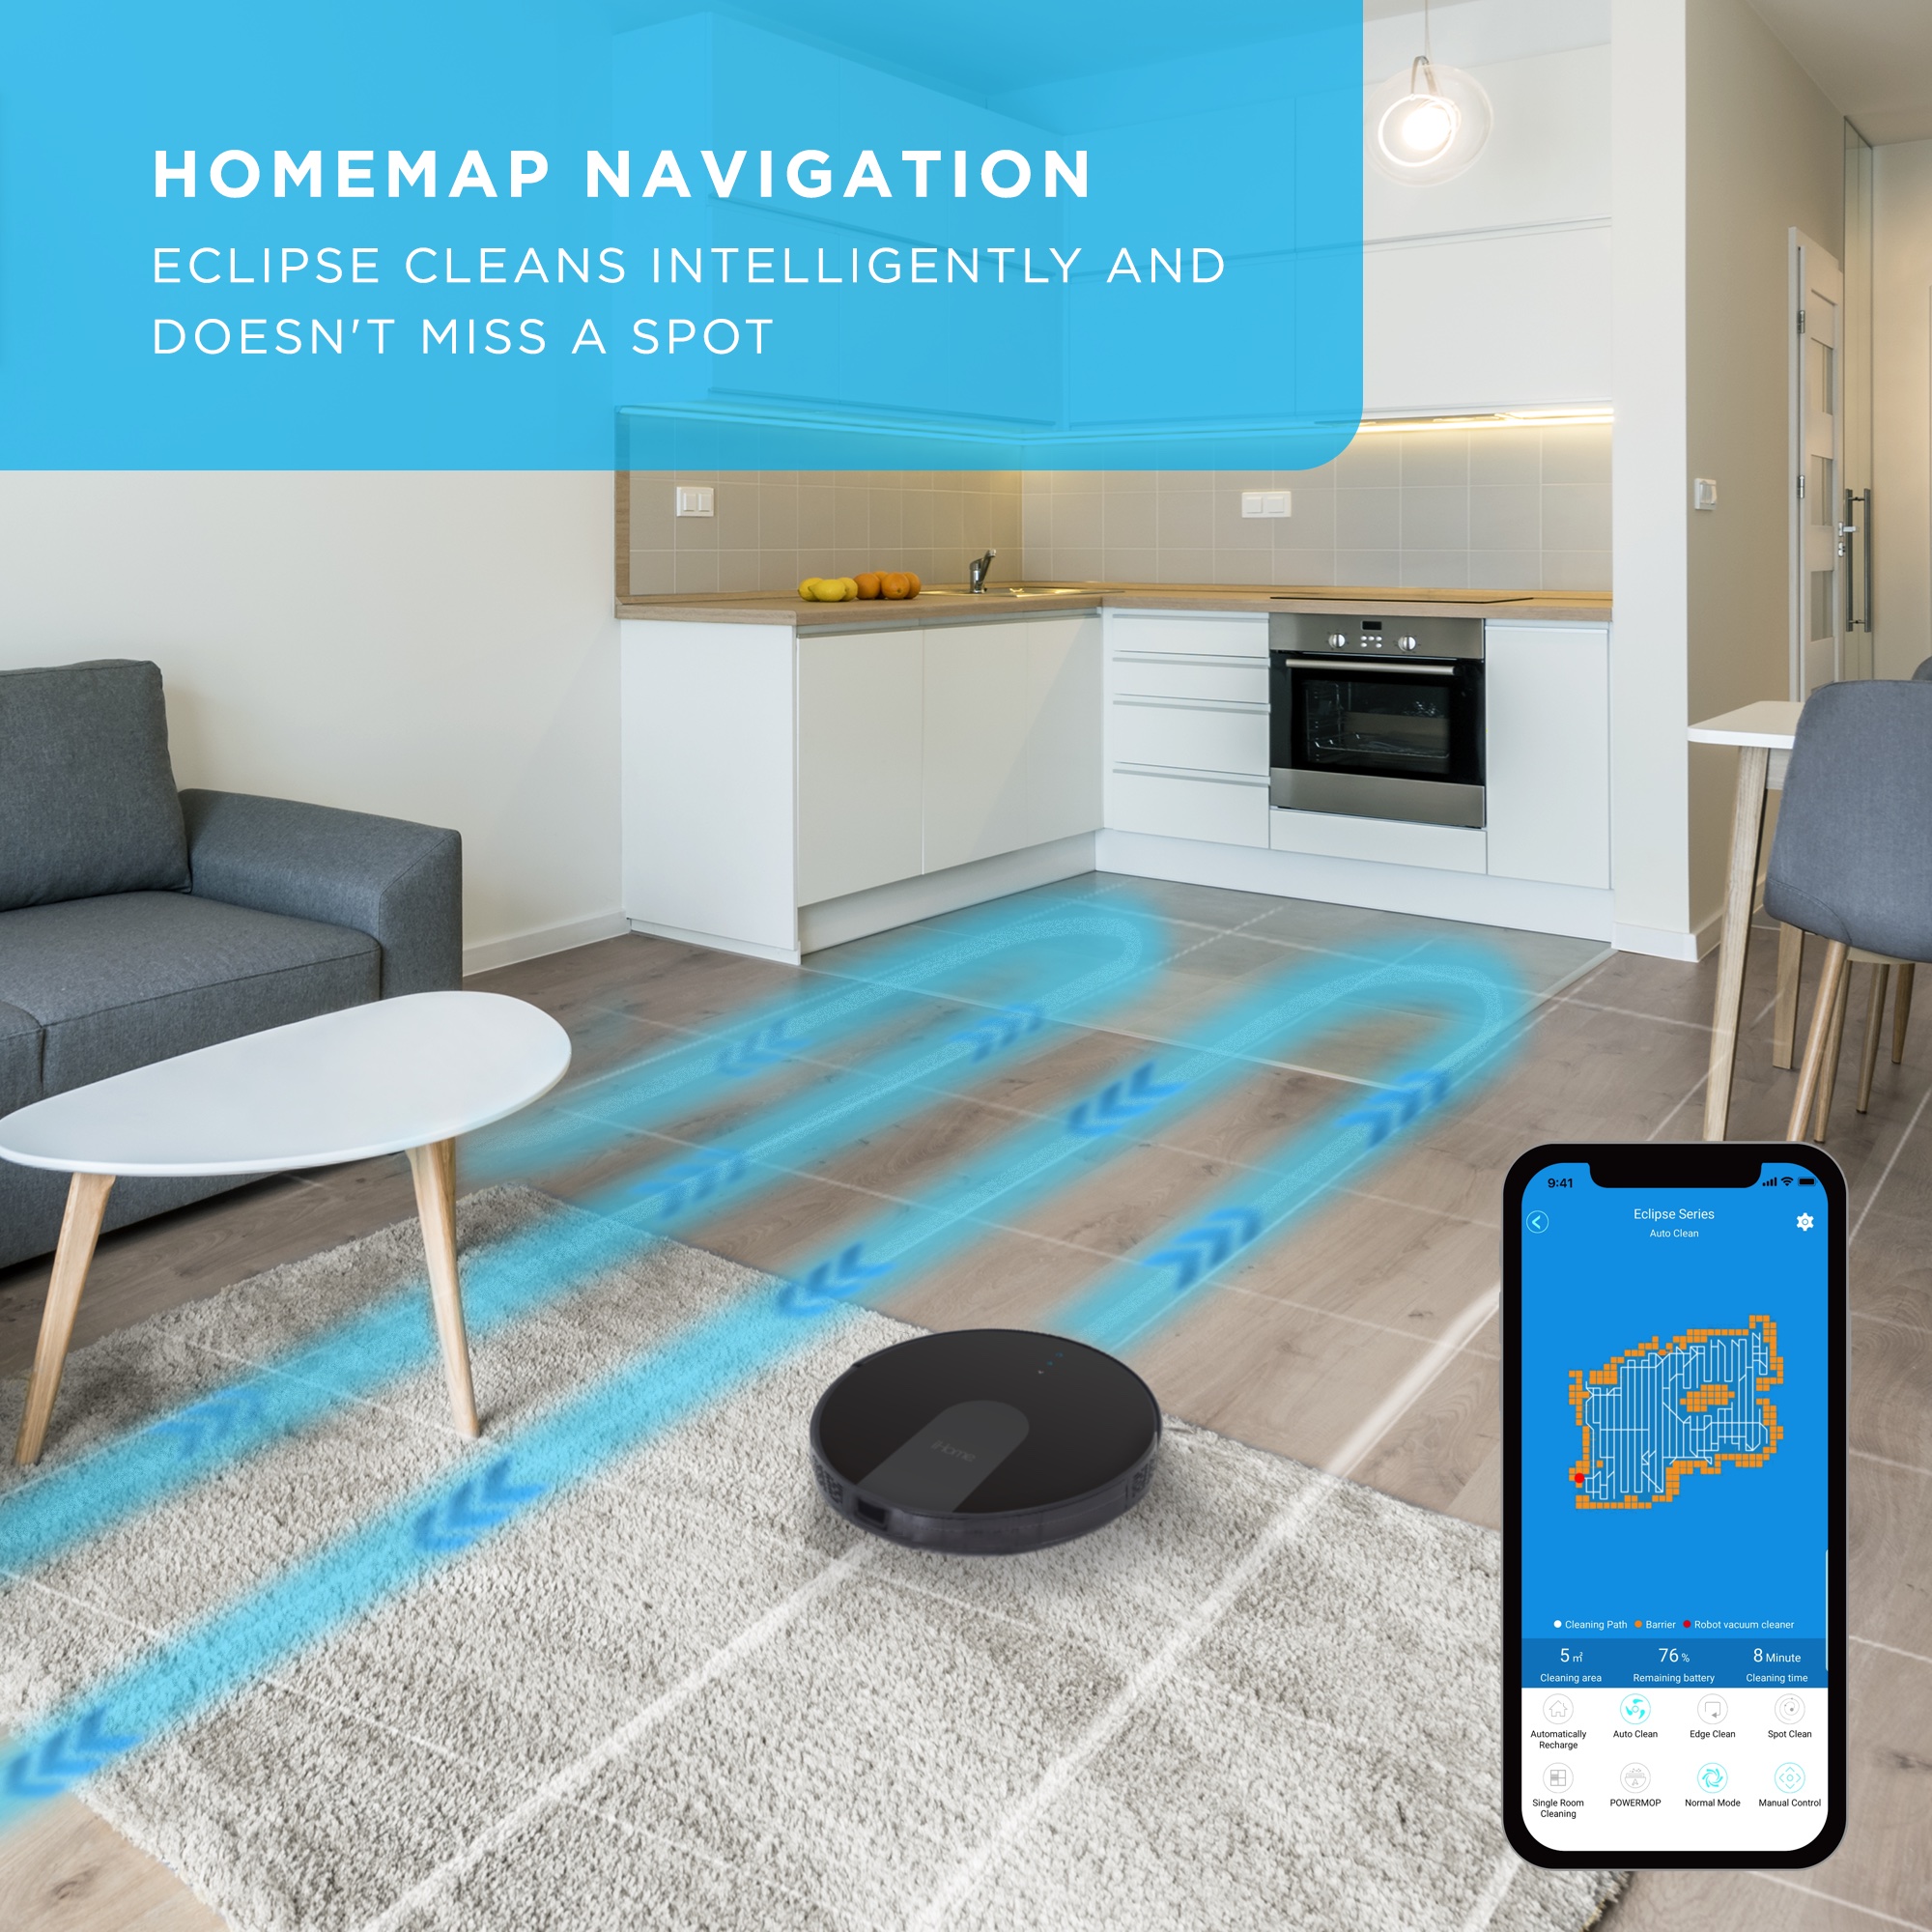 iHome AutoVac Eclipse G 2-in-1 Robot Vacuum and Mop with Homemap Navigation, Ultra Strong Suction Power, Wi-Fi/App Connectivity - image 2 of 11